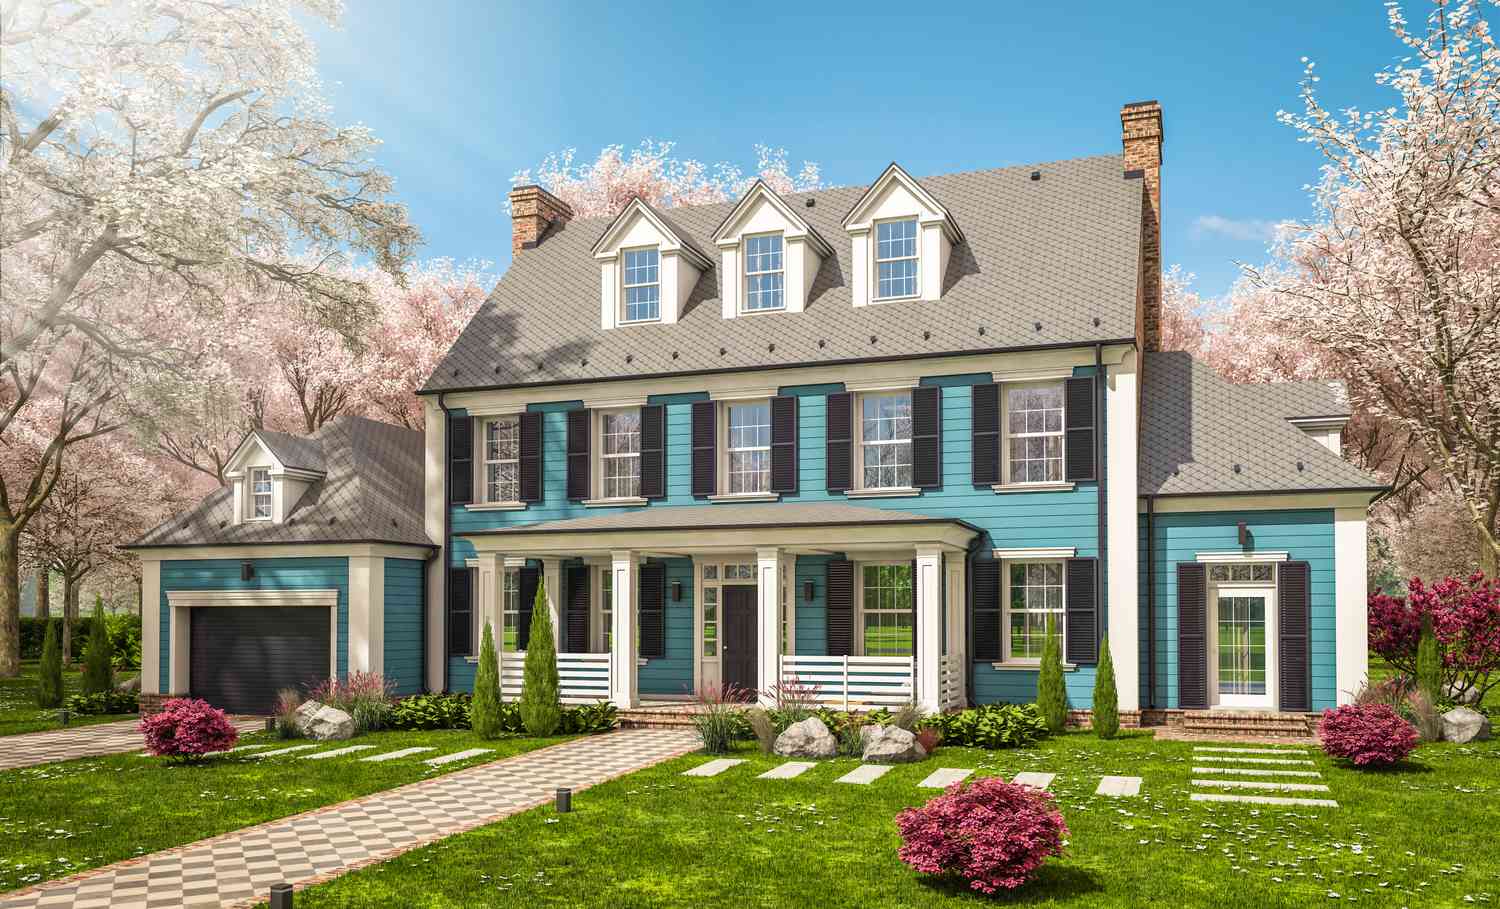 20 Exterior Paint Ideas For Inviting Curb Appeal